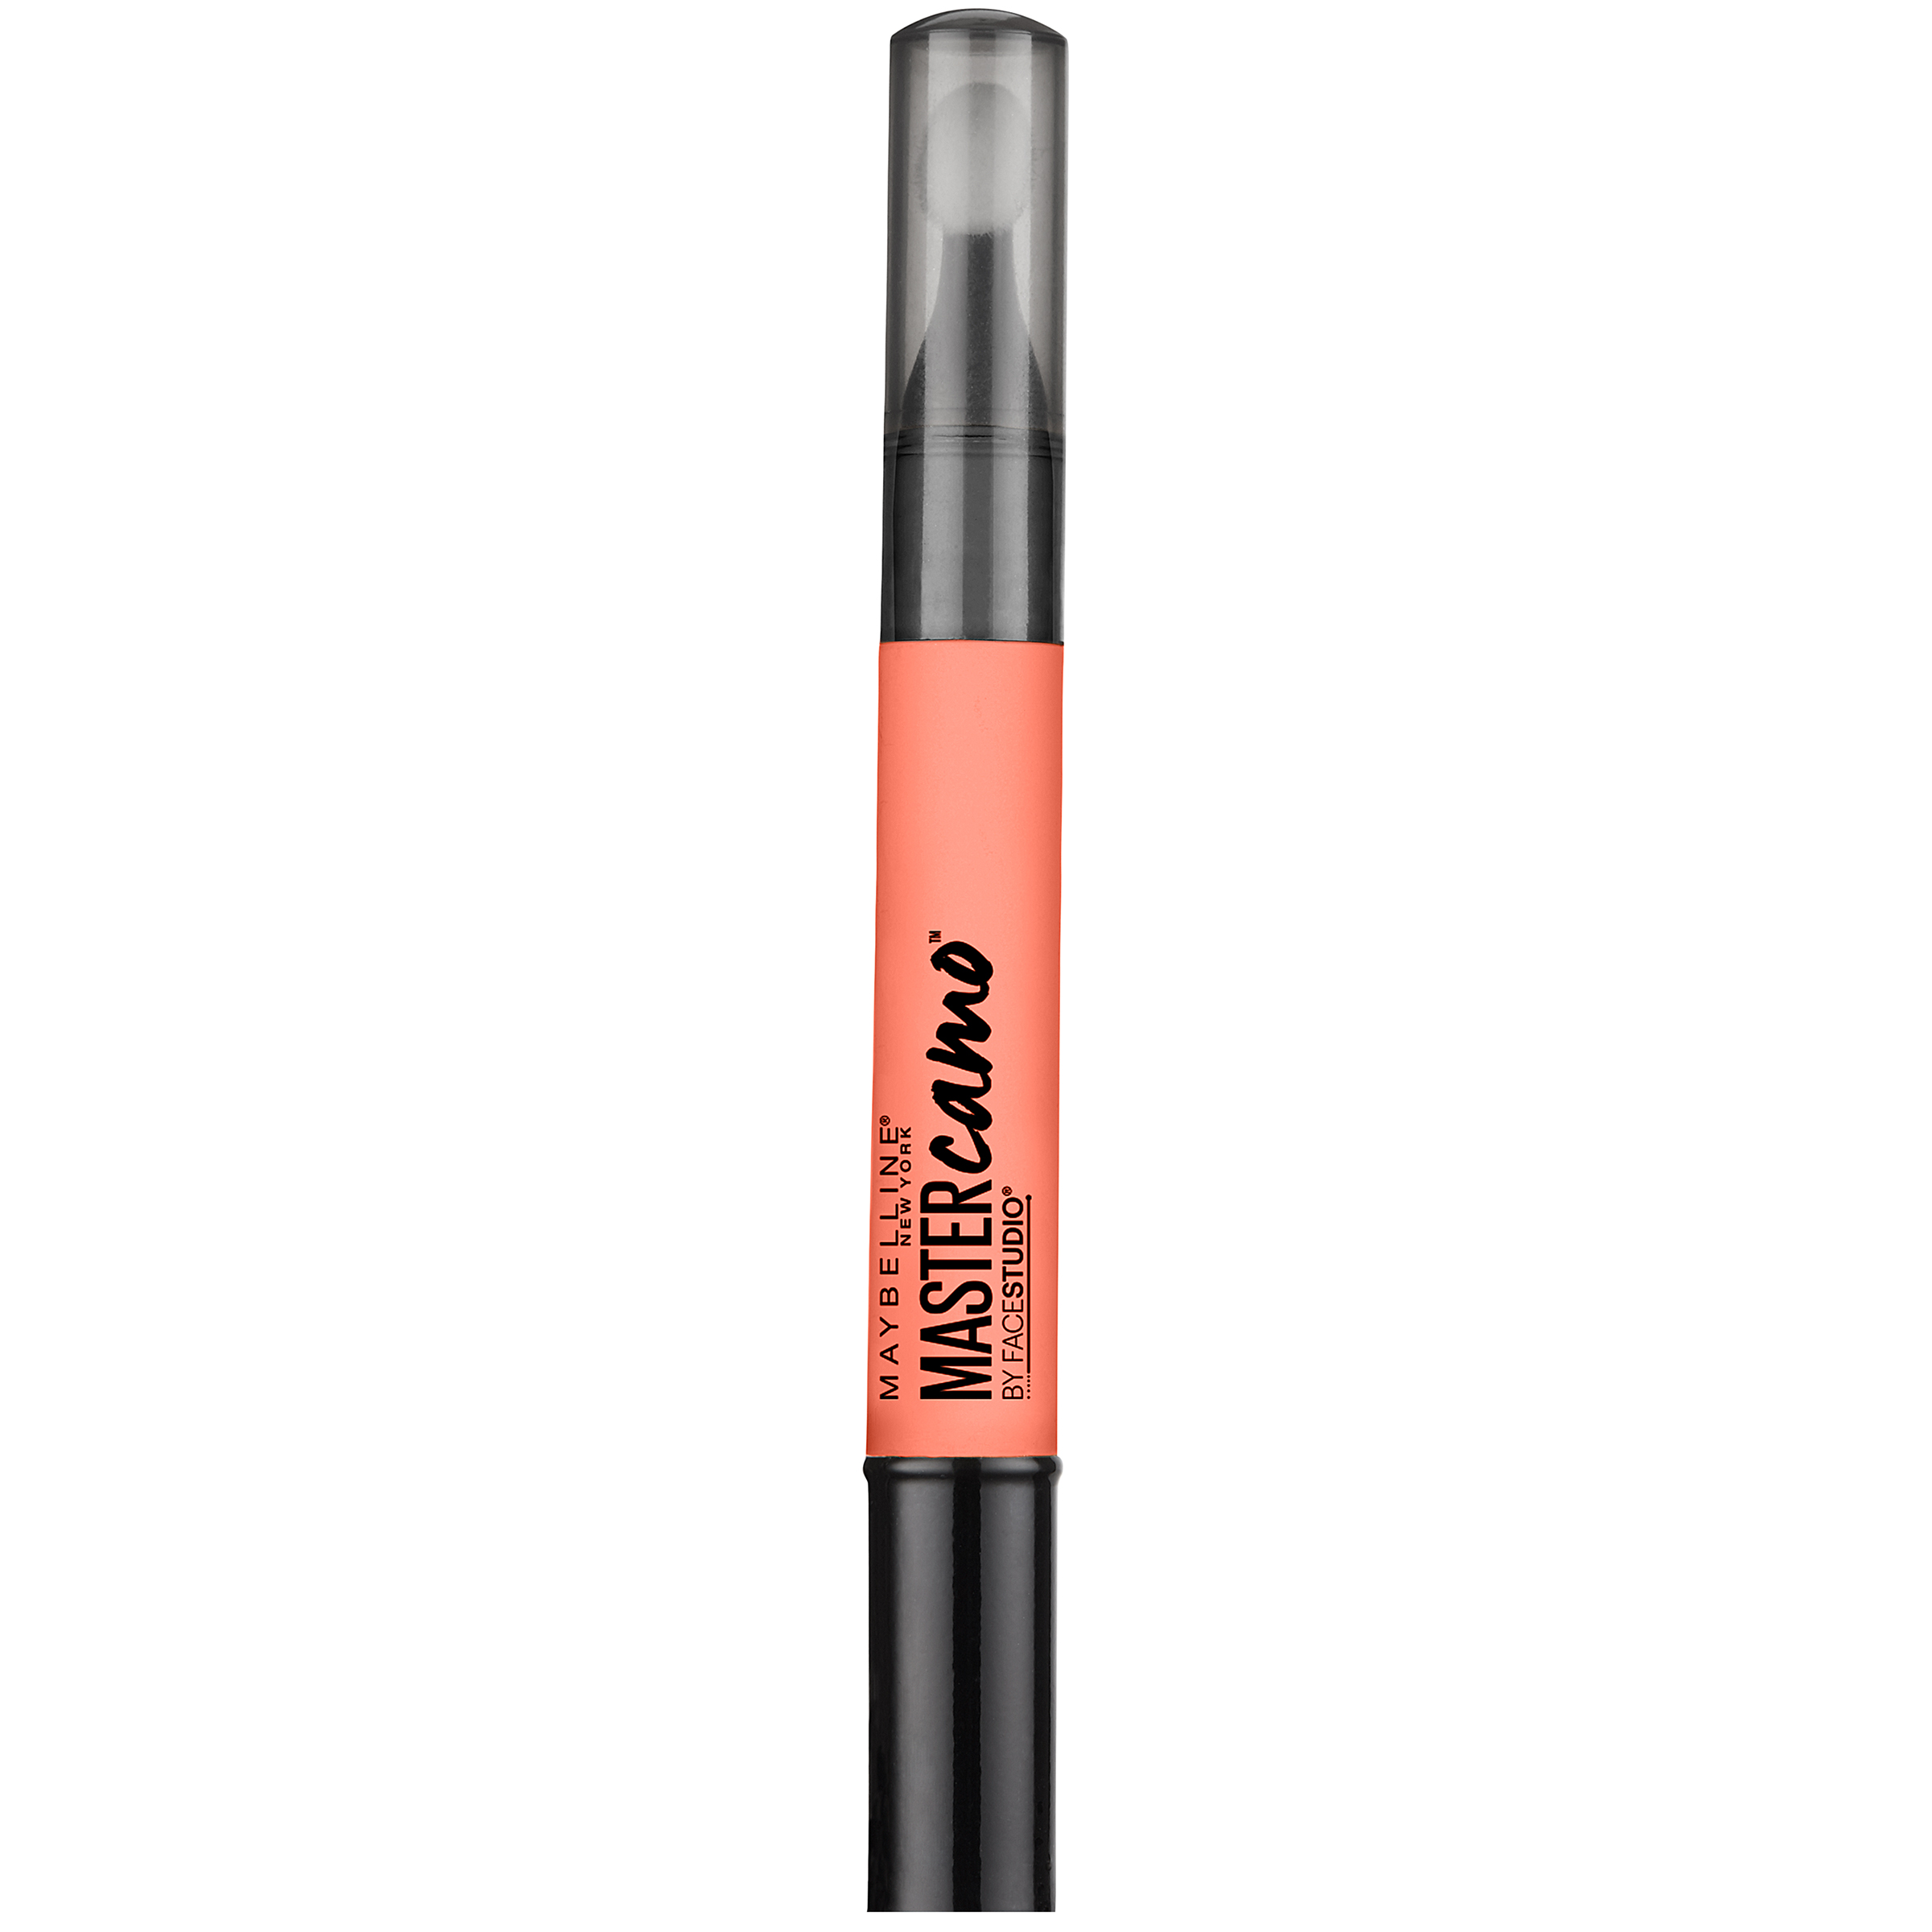 Maybelline New York Maybelline  Master Camo Color Correcting Pen, Apricot For Dark Circles, light-med, 0.05 fl. oz.